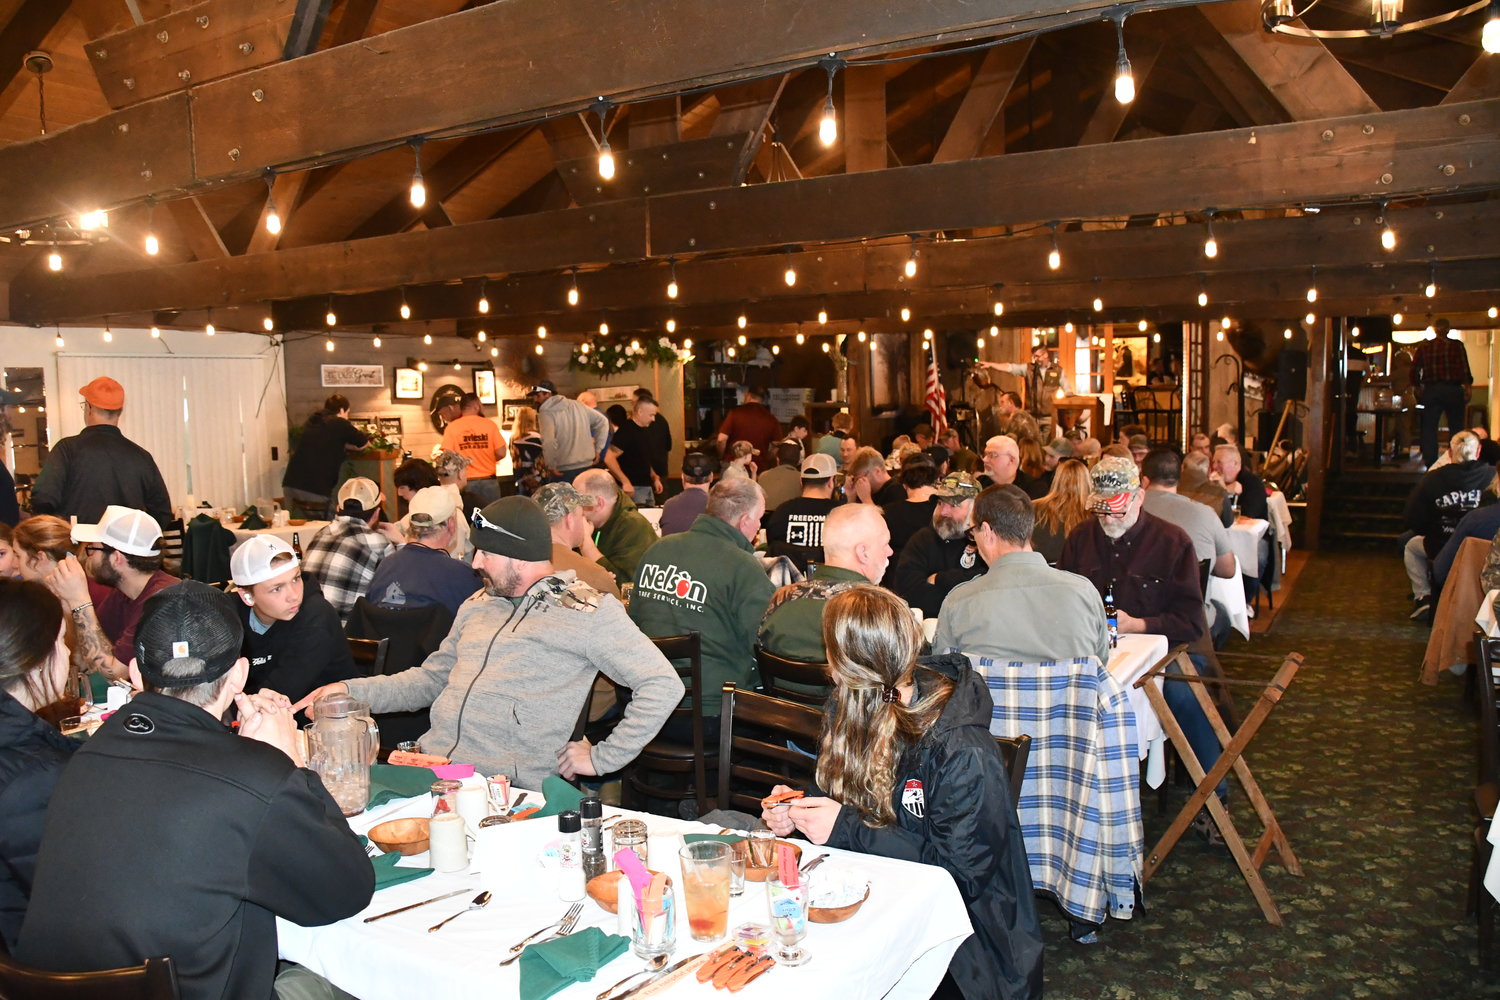 There were 193 delicious Prime Rib dinners served Sunday afternoon at The Rockland House in Roscoe as the Sullivan County Long Beards hosted its Annual Hunting Heritage Banquet.